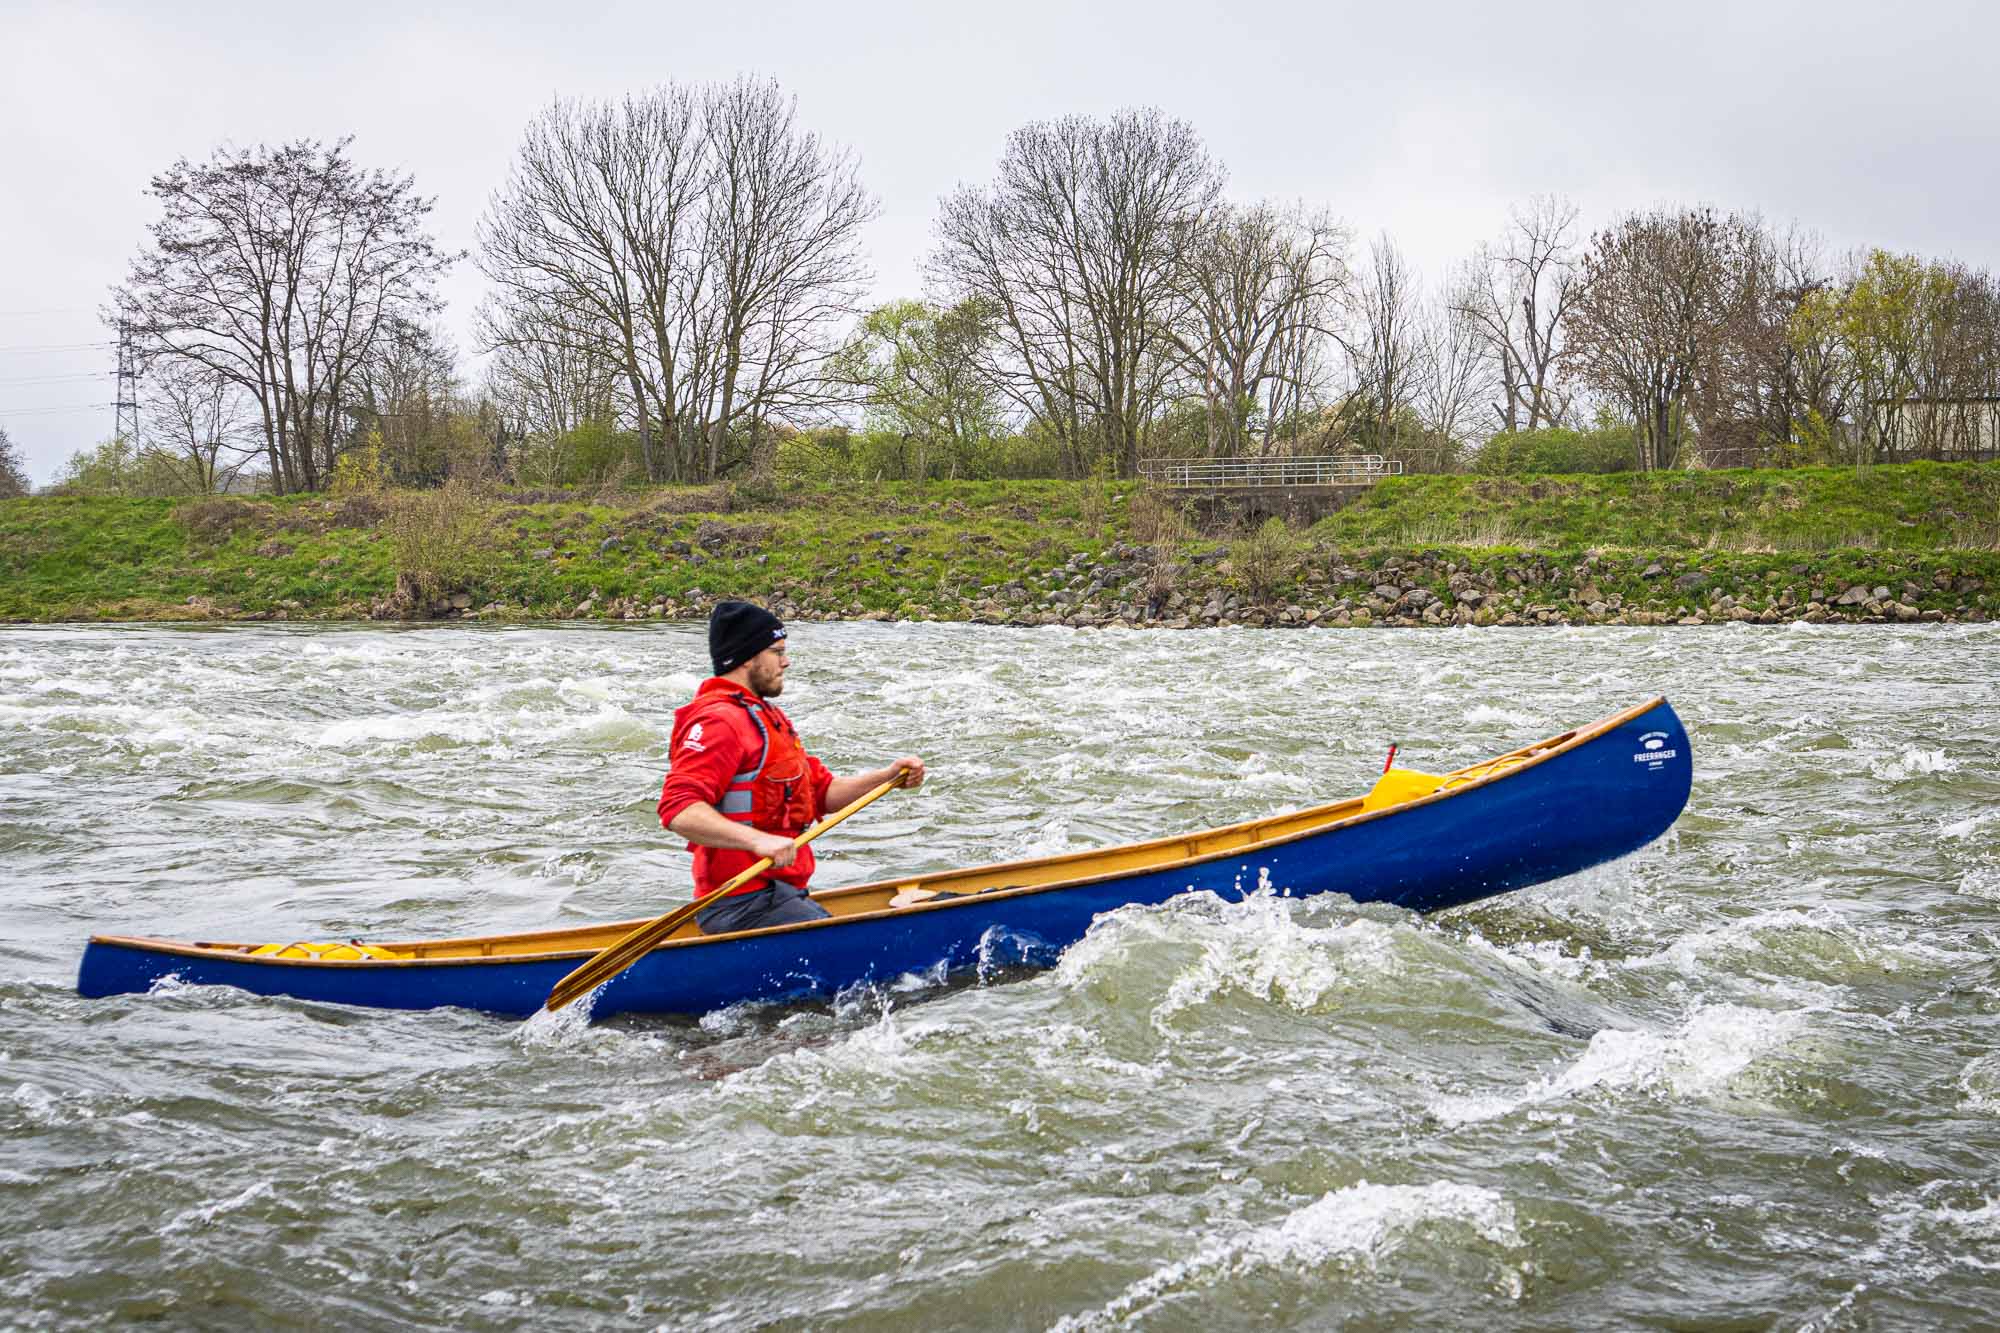 Mastering the art of canoeing on the Meuse River